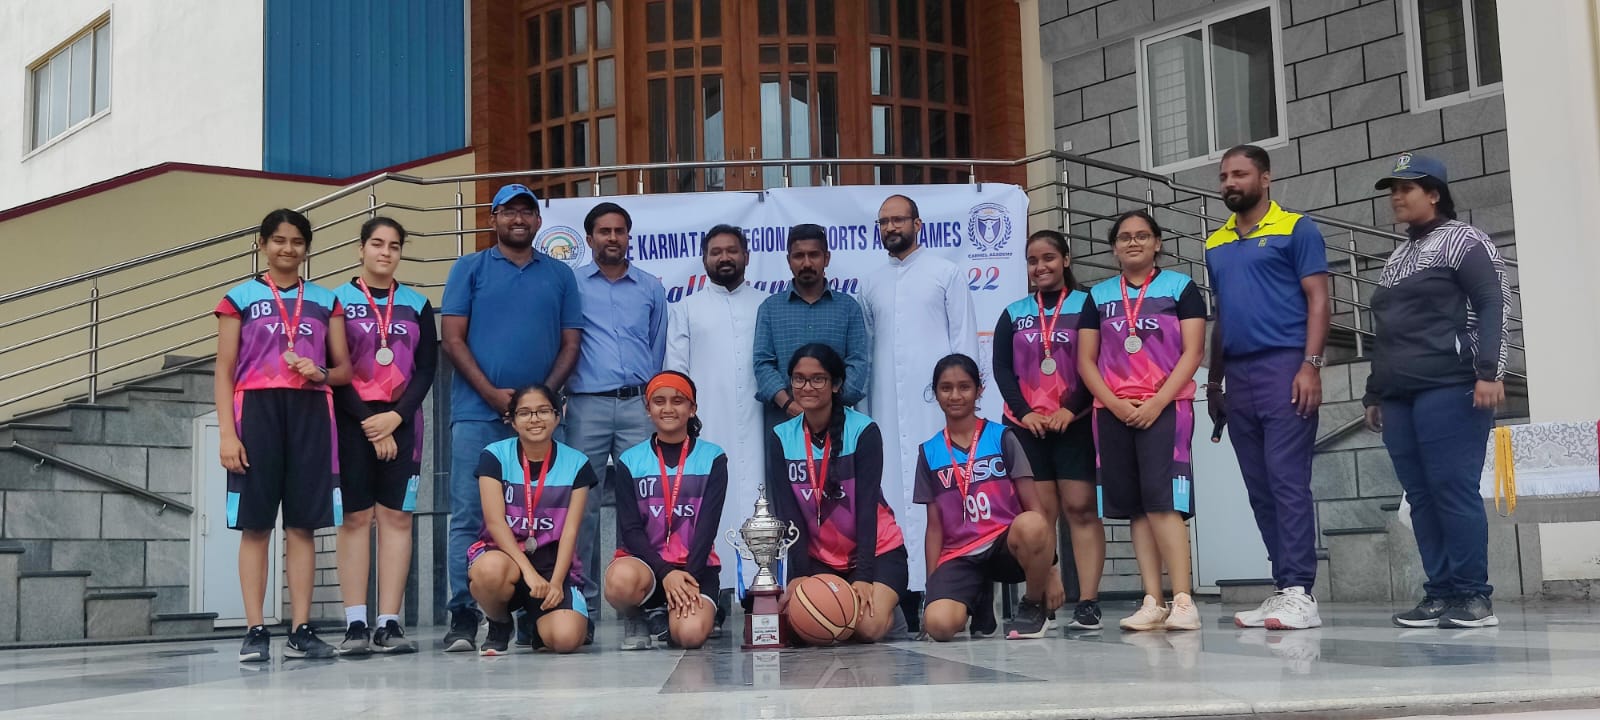 <strong>VNS team Under 19 Girls runners up</strong>